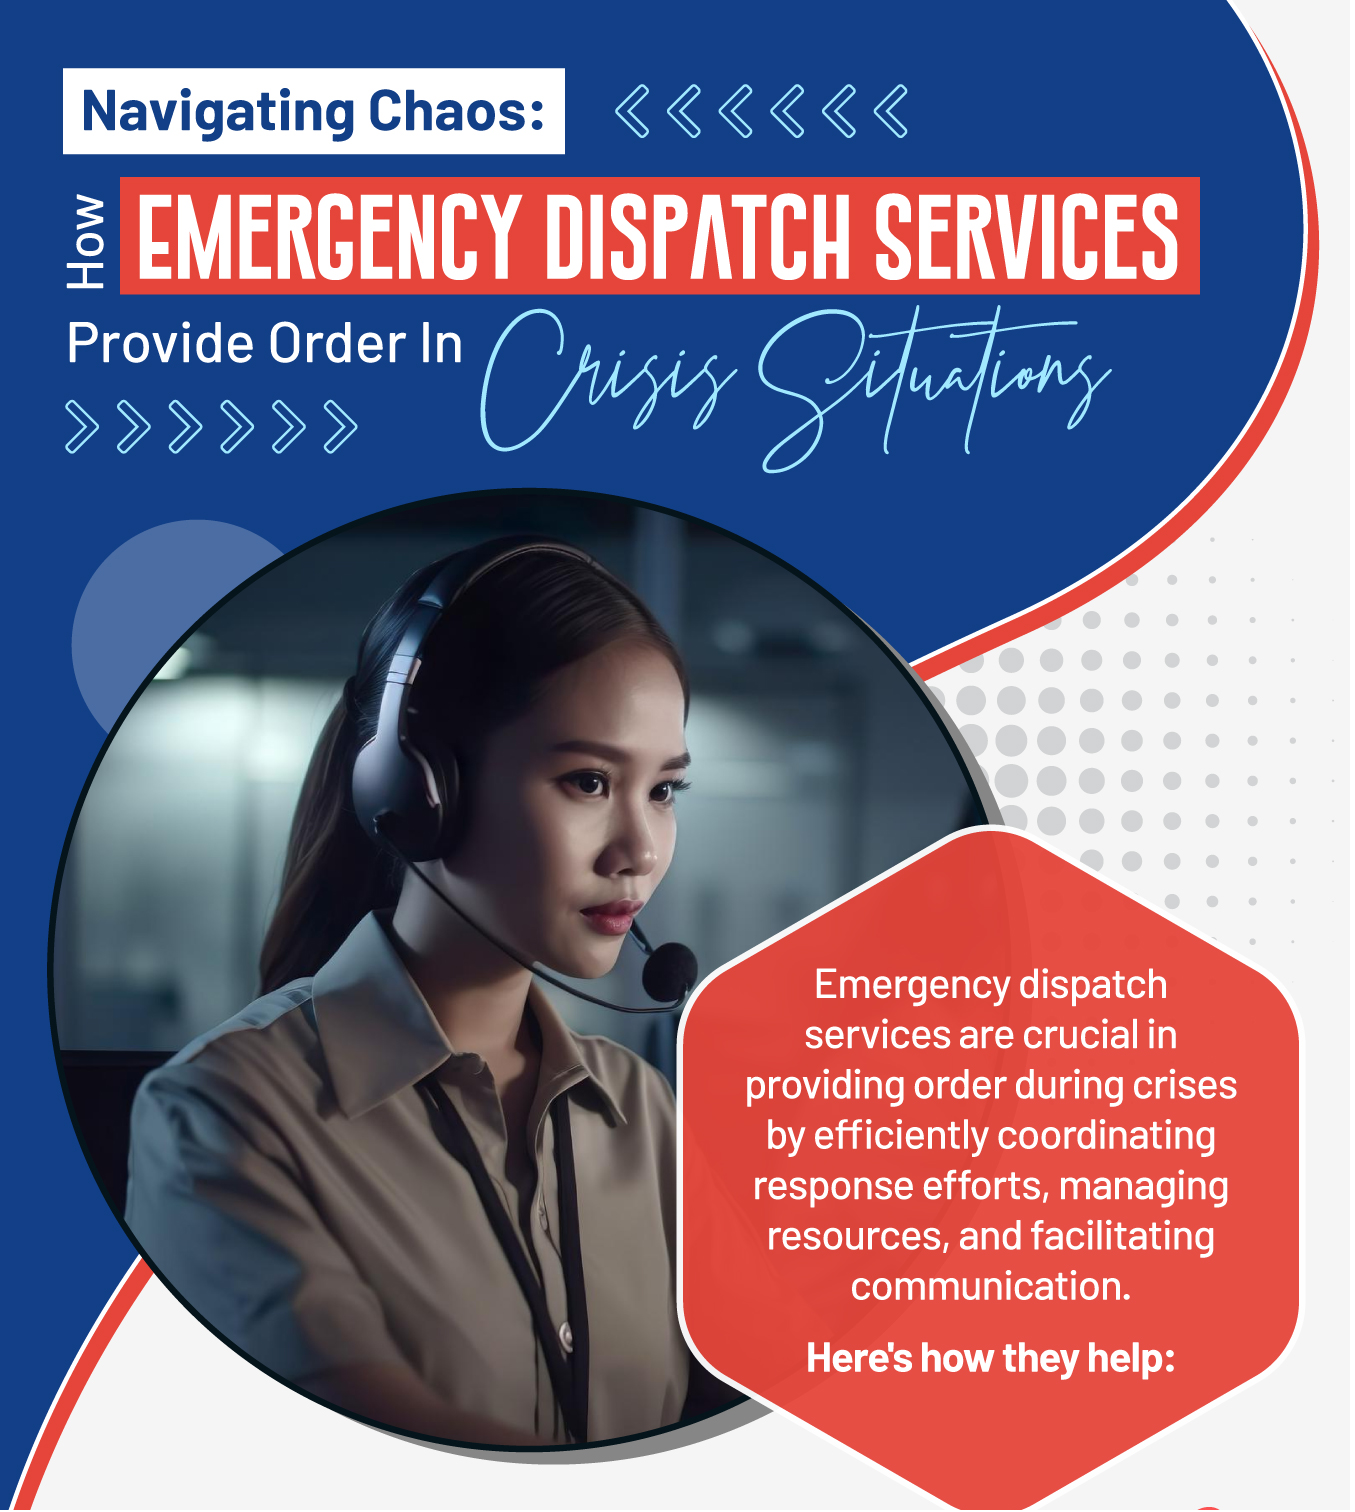 Navigating Chaos: How Emergency Dispatch Services Provide Order in Crisis Situations